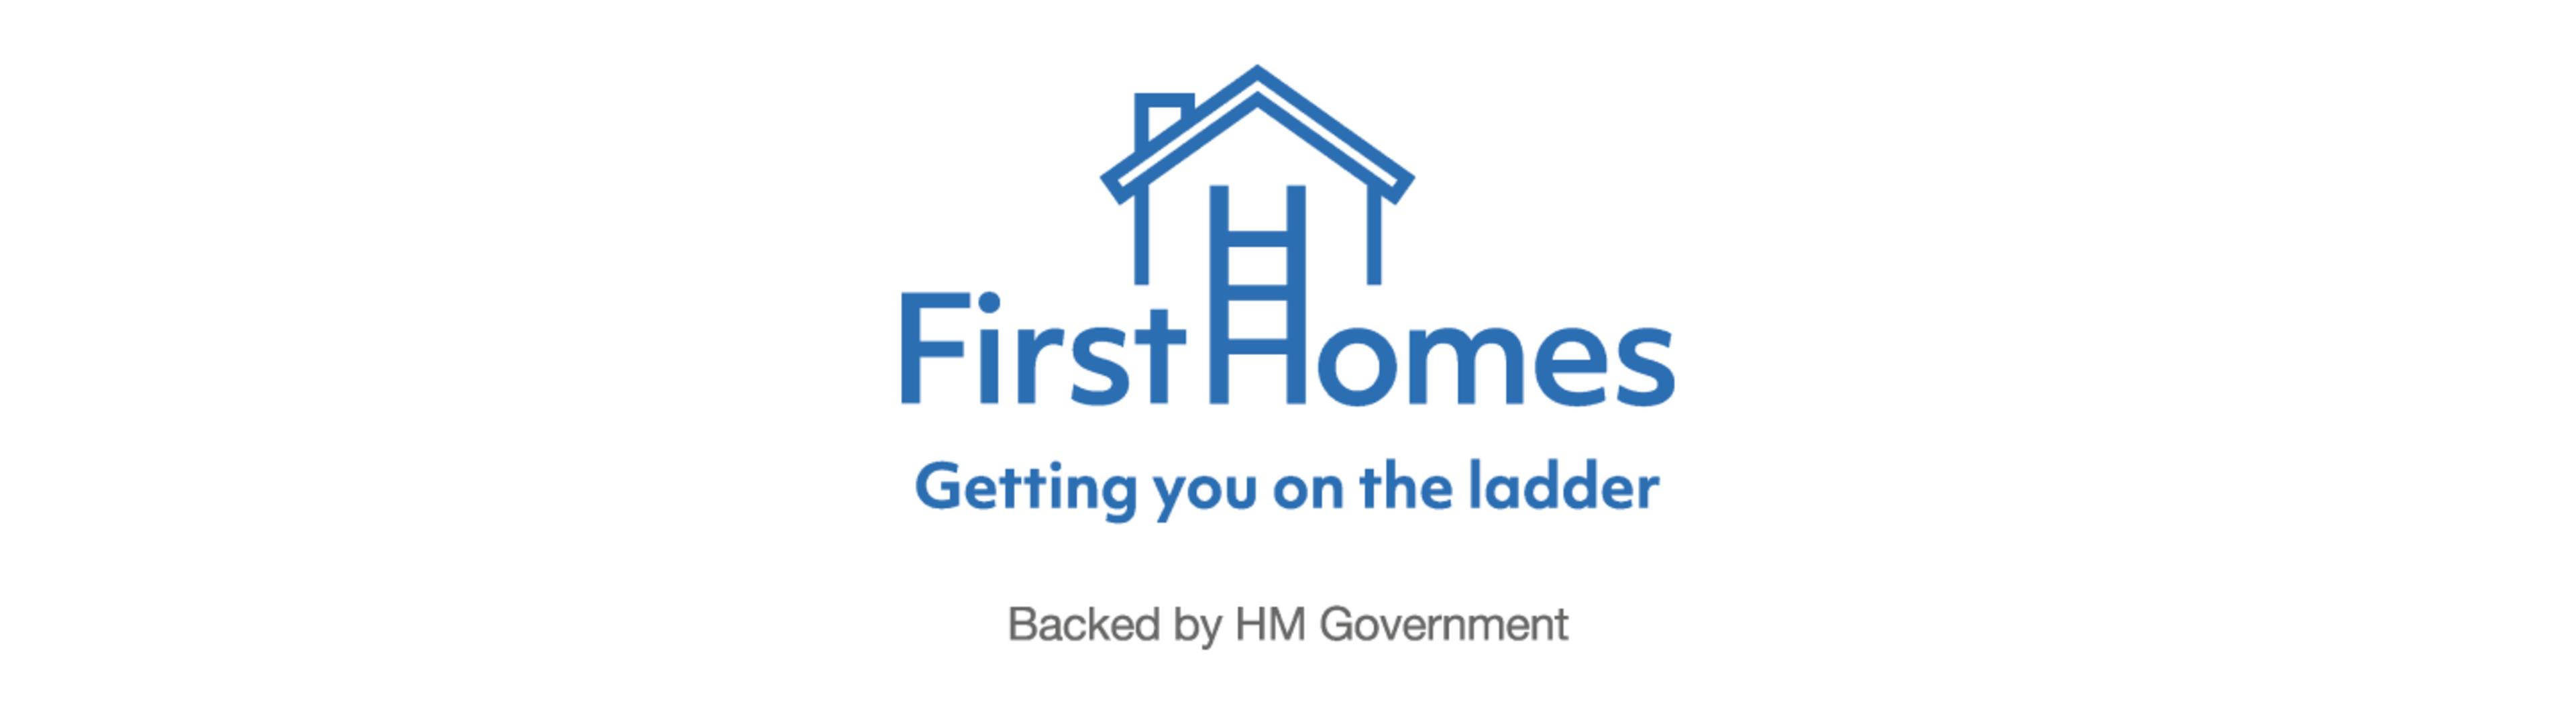 persona-homes-first-homes-logo-article-header